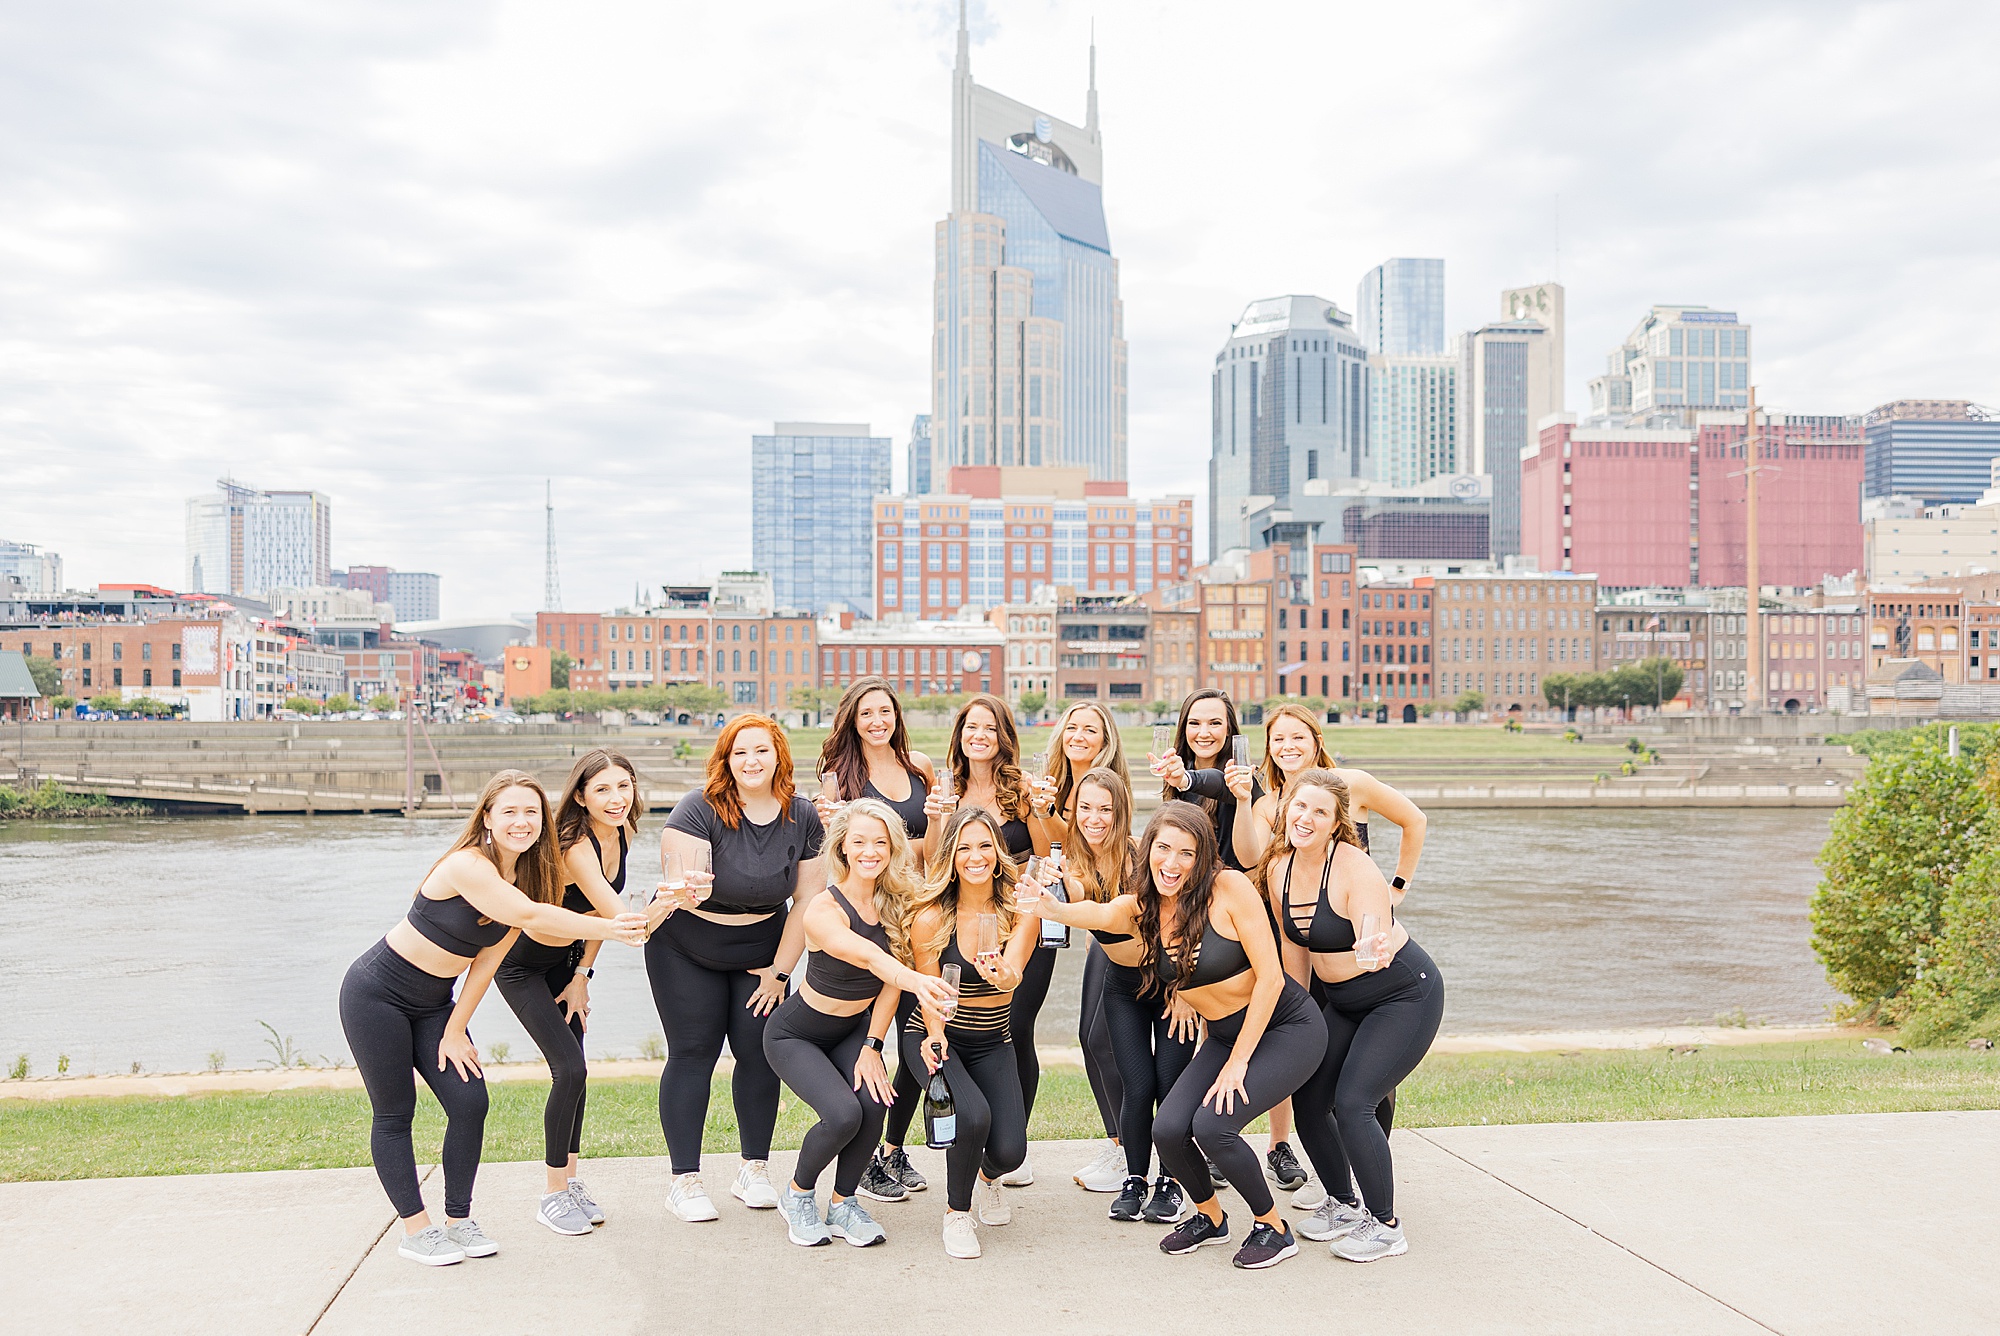 group of coaches poses together against Nashville skyline